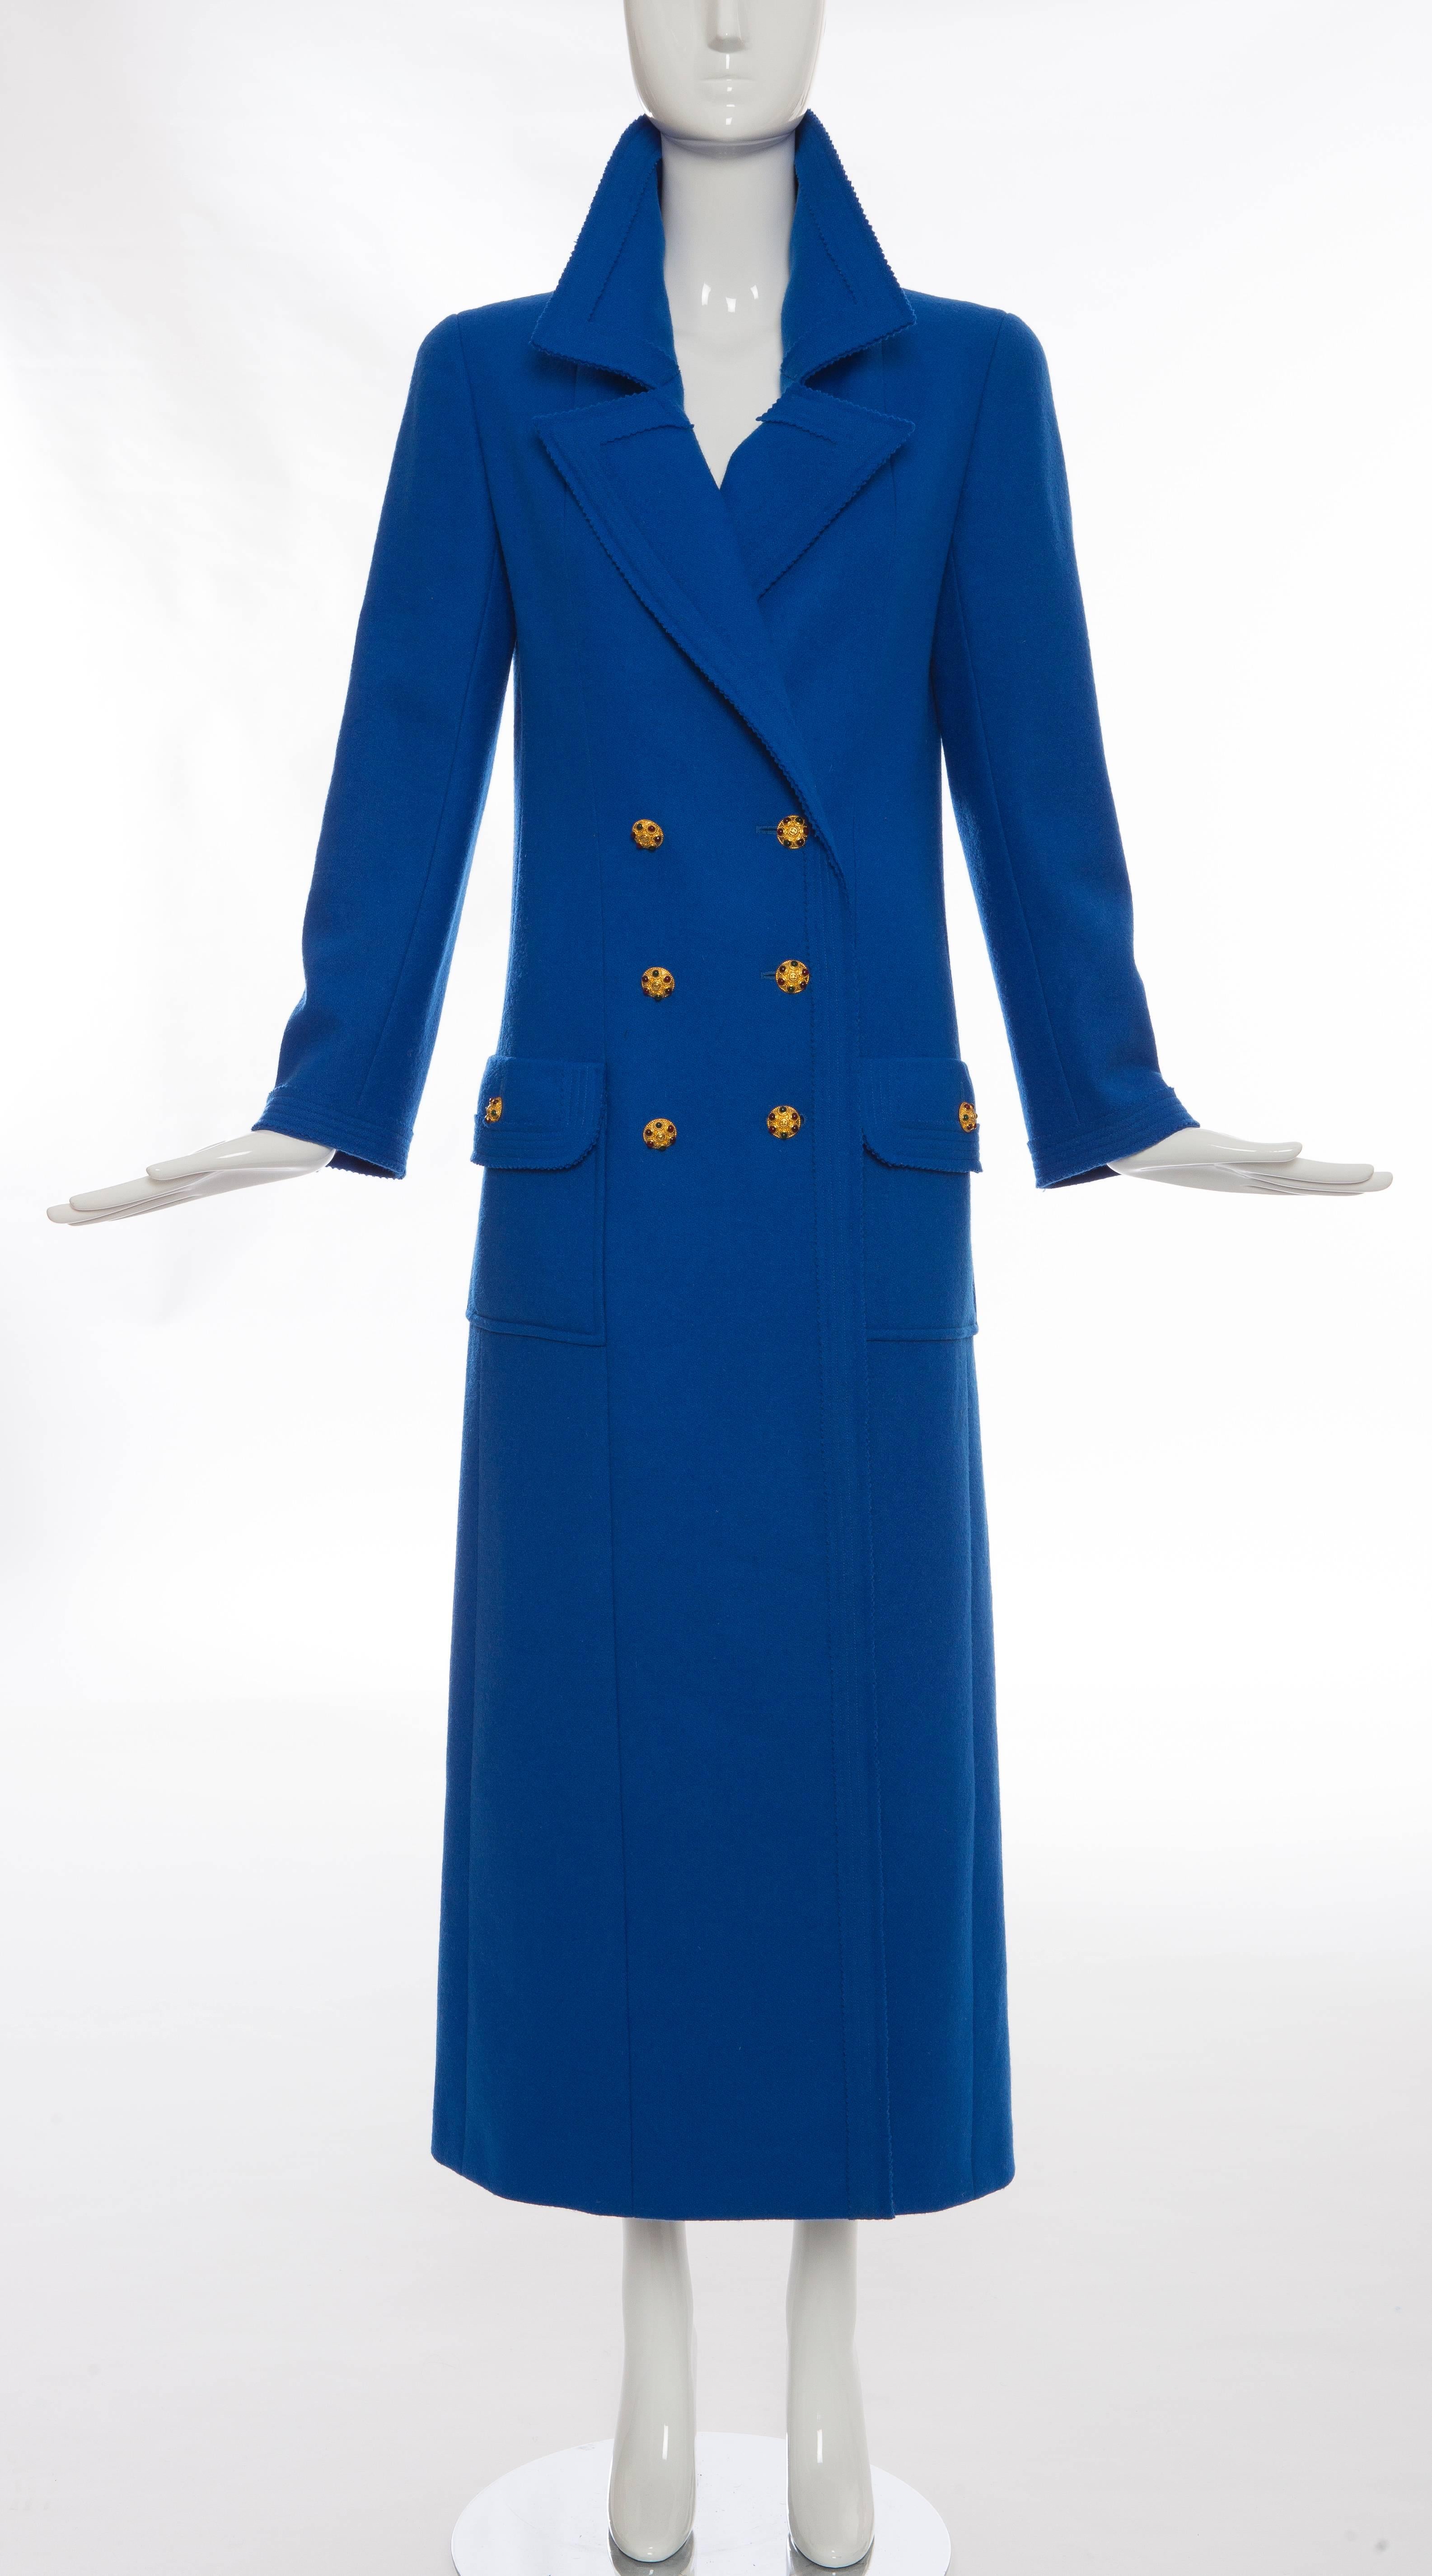 Chanel, Autumn - Winter 1996, royal blue wool double-breasted chesterfield coat with Maison Gripoix buttons, notched lapels, dual flap pockets and fully lined in silk.

FR. 36
US. 4

Bust 34”, Waist 32”, Shoulder 15”, Length 52.5”, Sleeve 32”